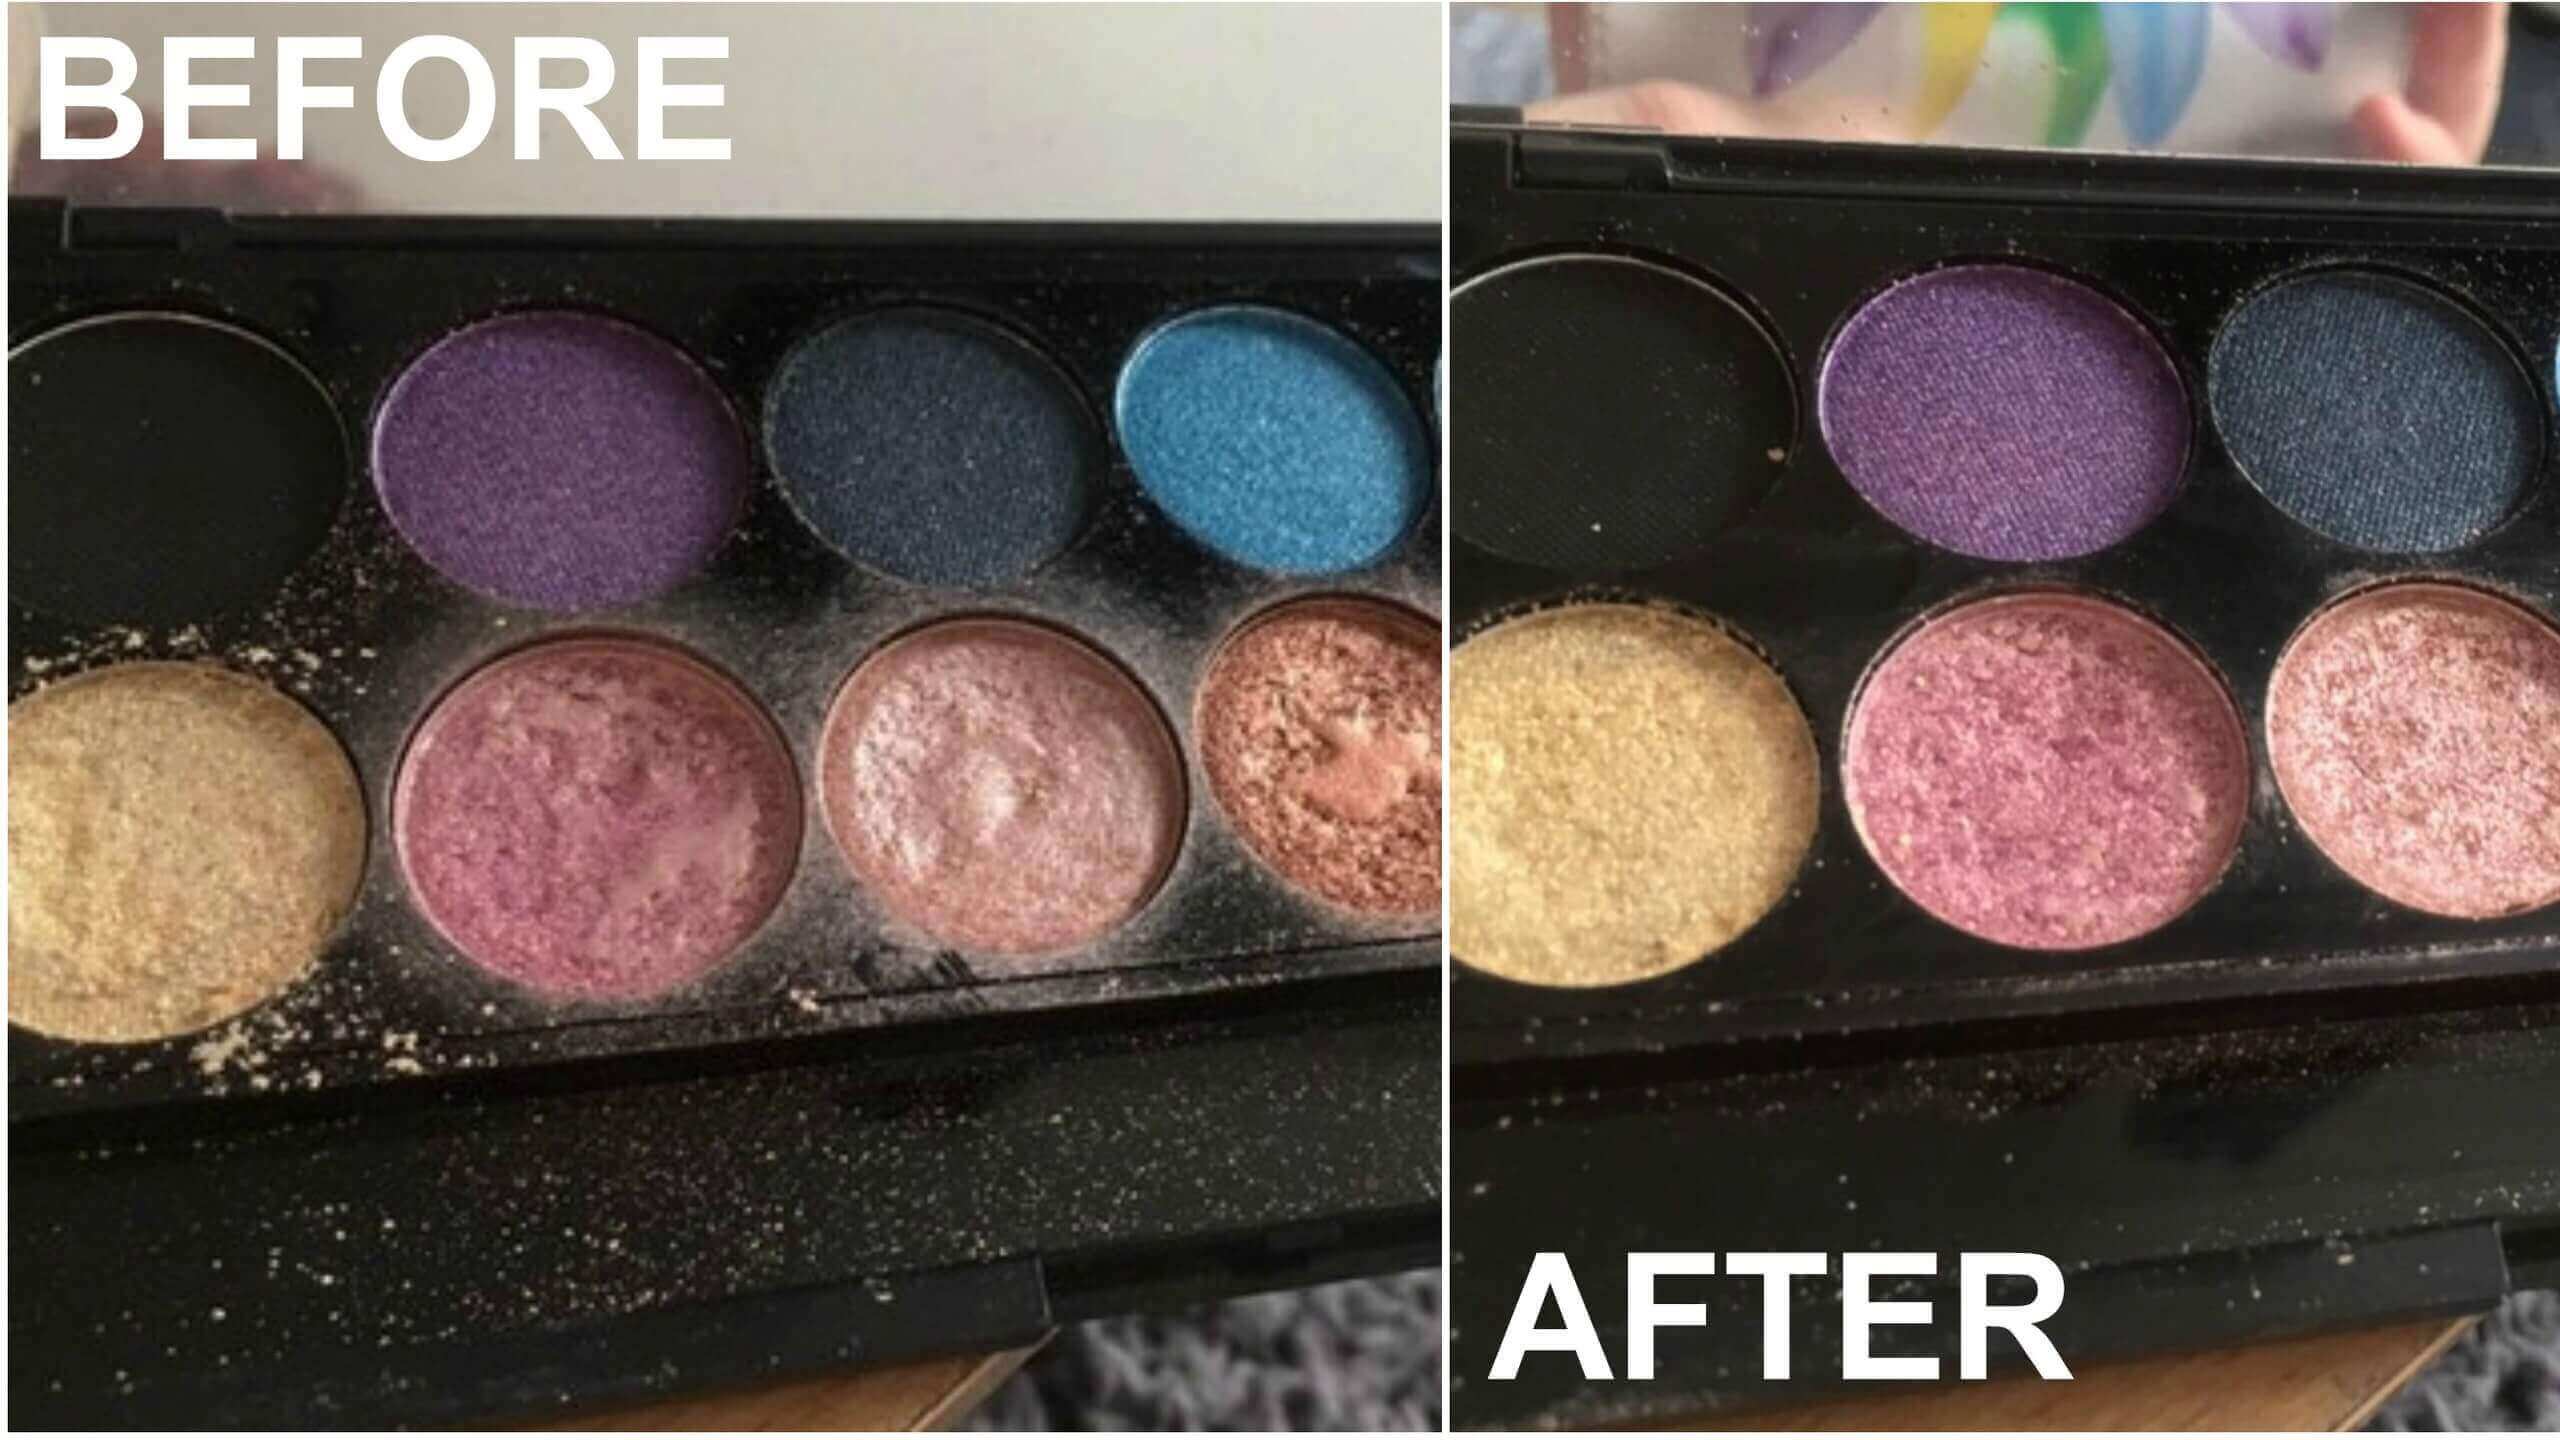 How to Sanitize Makeup Palette